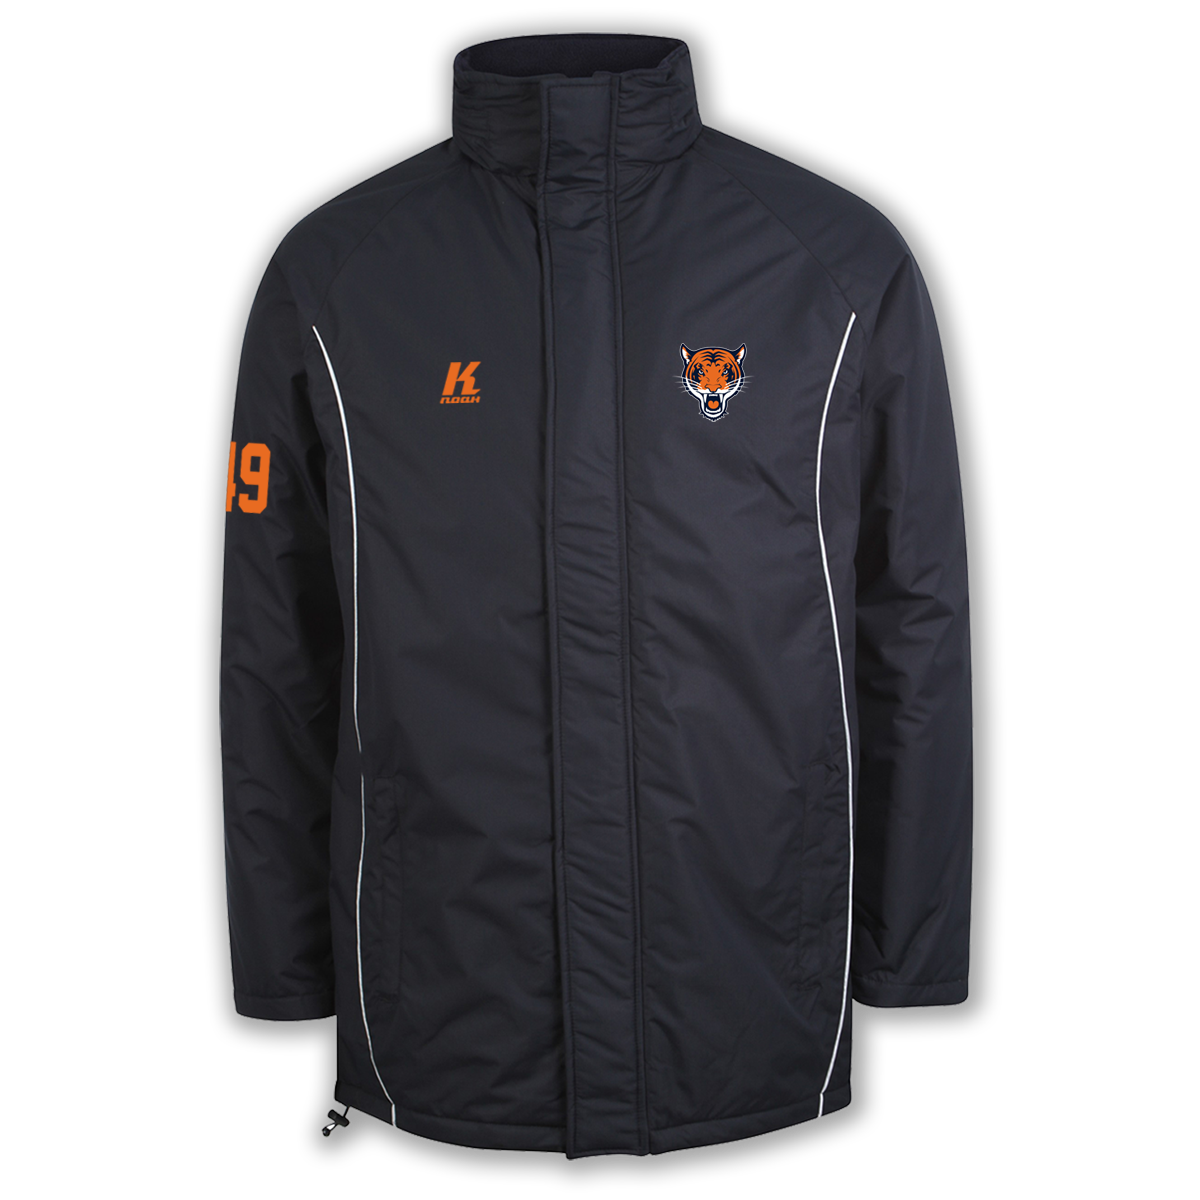 Tigers Stadium Jacket with Playernumber/Initials